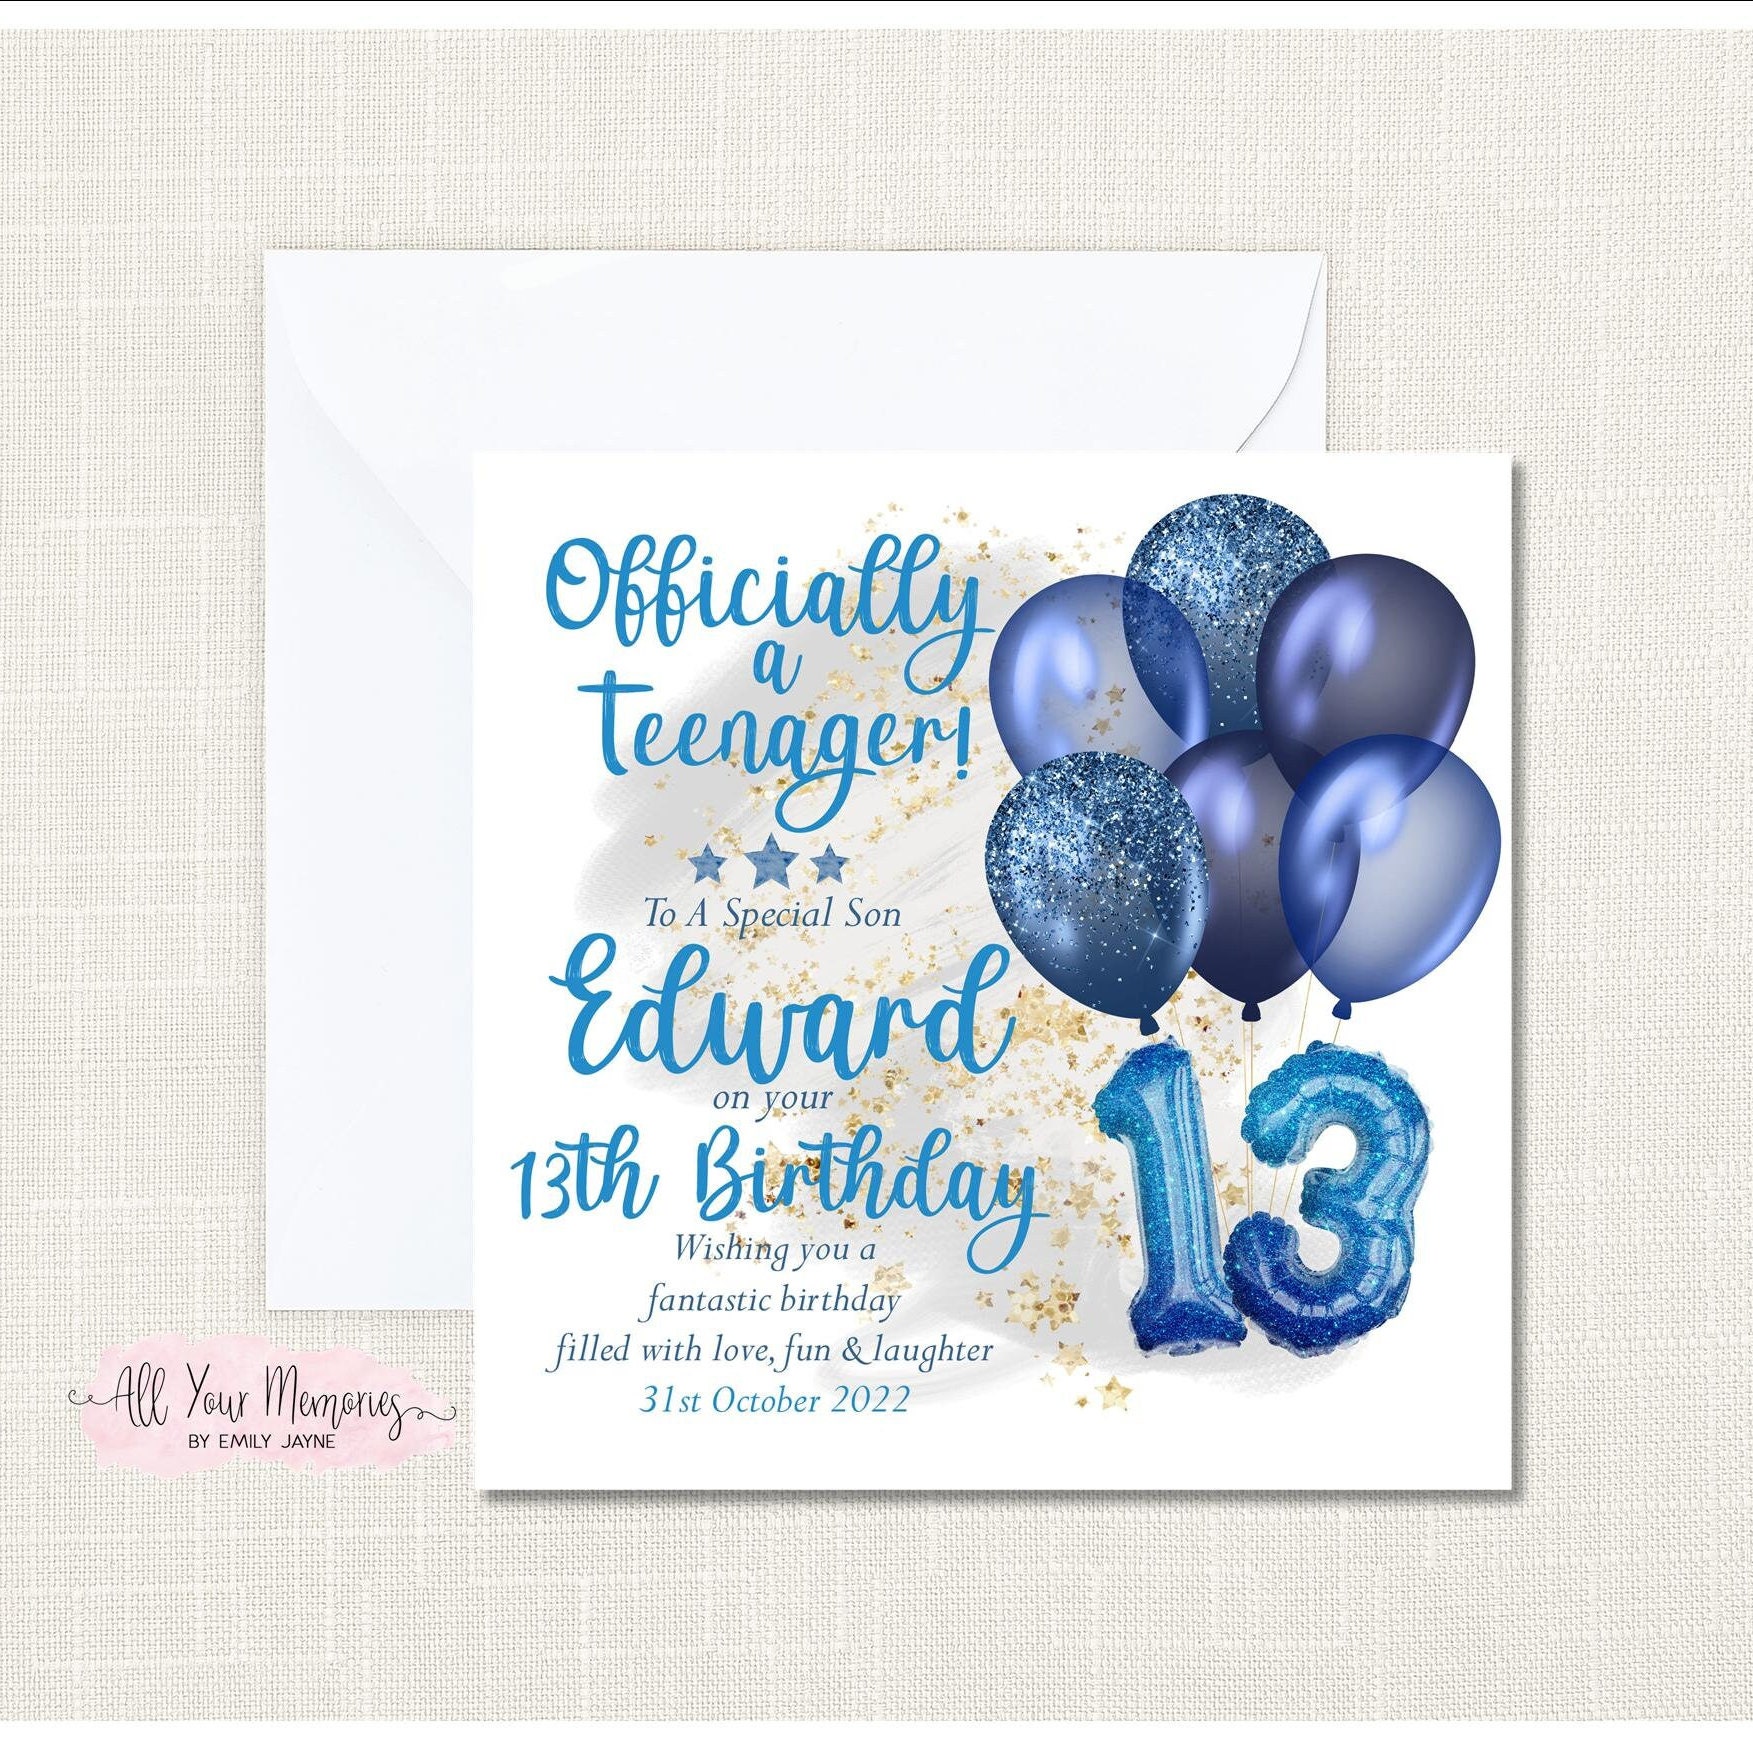 Personalised 13th Birthday Officially a Teenager Photo Album / Scrapbook /  Guest Book 20 Pages Gift for Son Grandson A5 